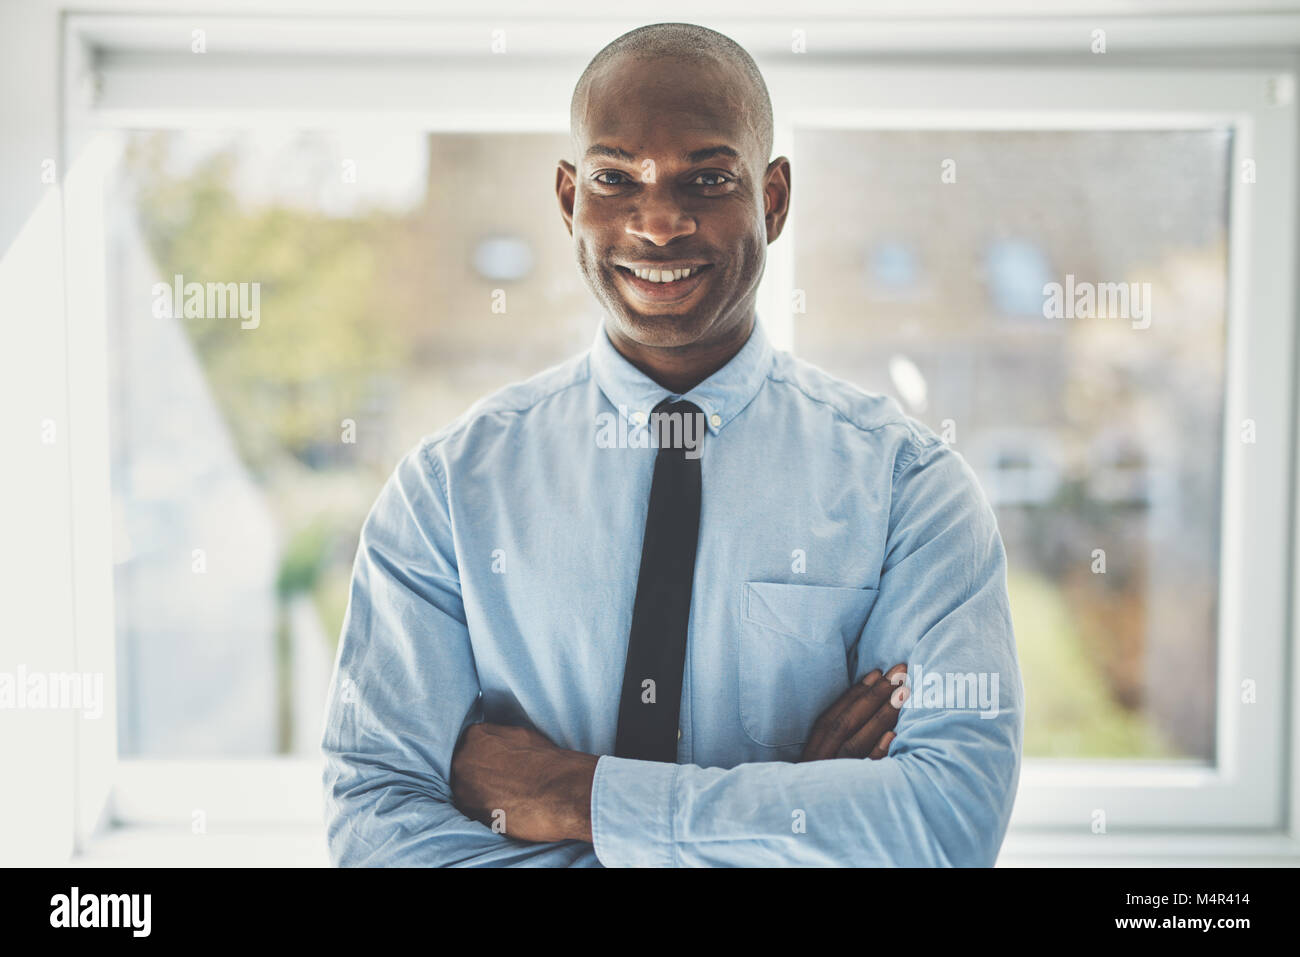 Smiling African businessman wearing a shirt and tie standing confidently with his arms crossed in his home office Stock Photo